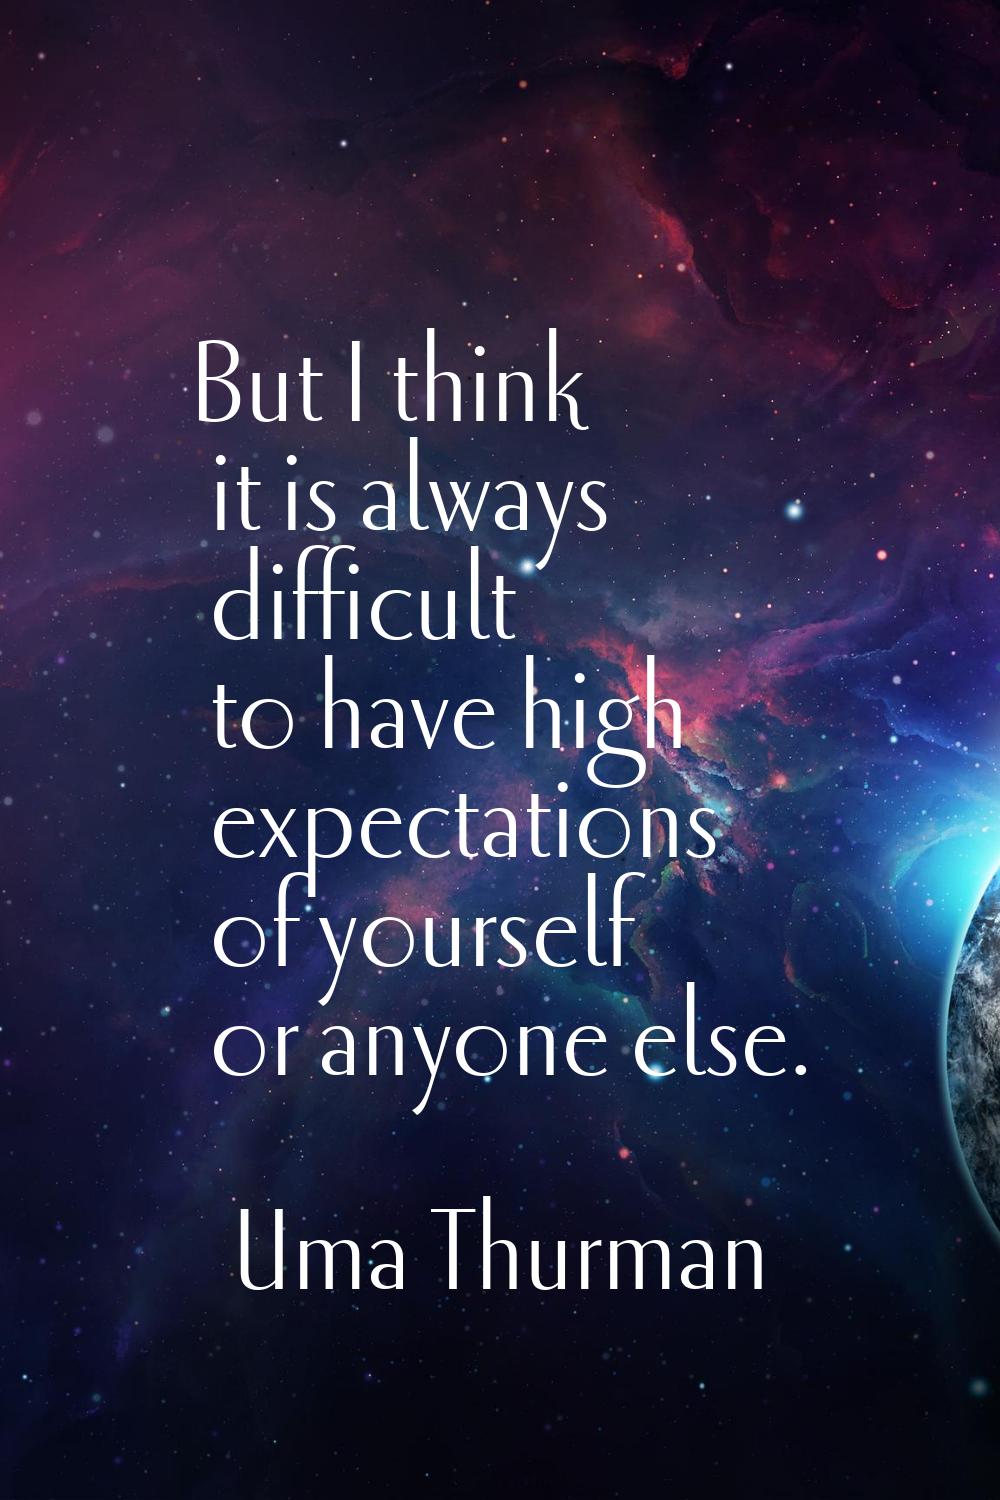 But I think it is always difficult to have high expectations of yourself or anyone else.